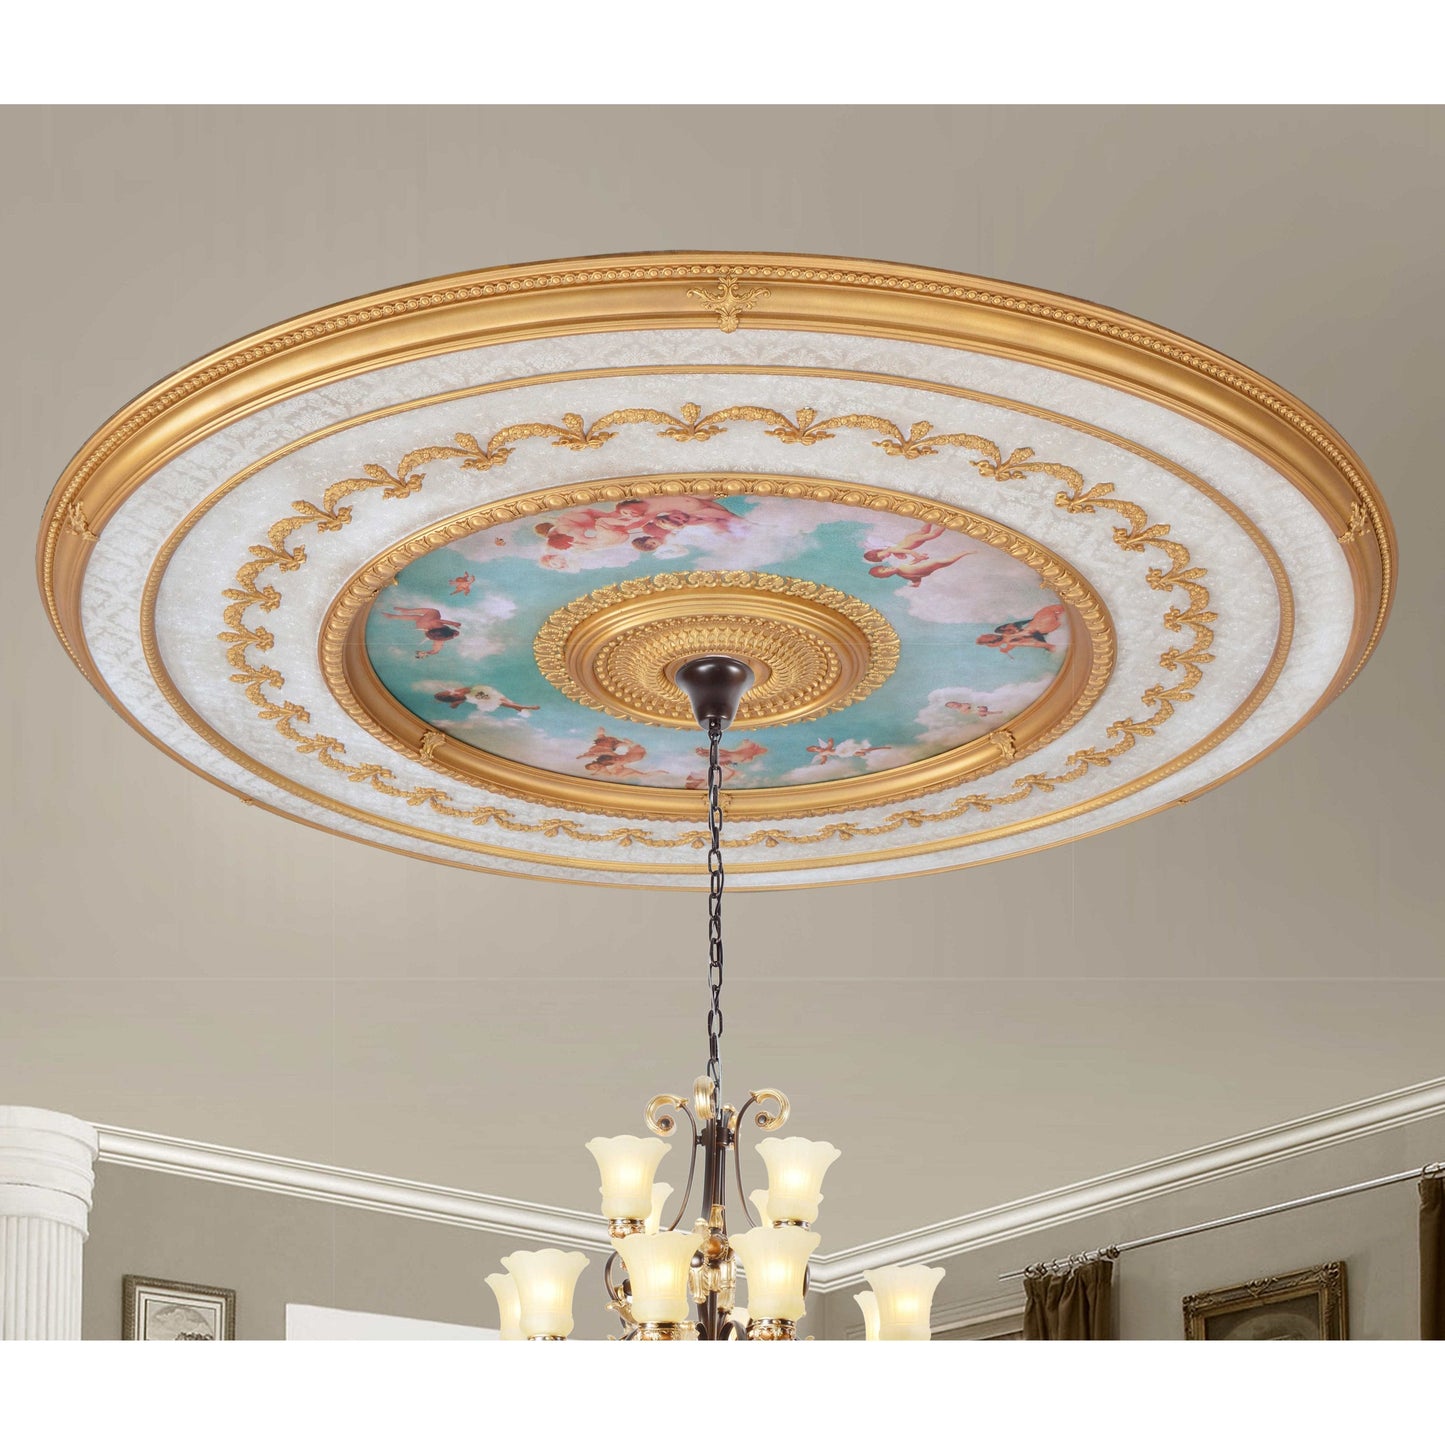 AFD Home Sistine Chapel Classical Grand Ceiling Medallion 98.5 Inch Diameter